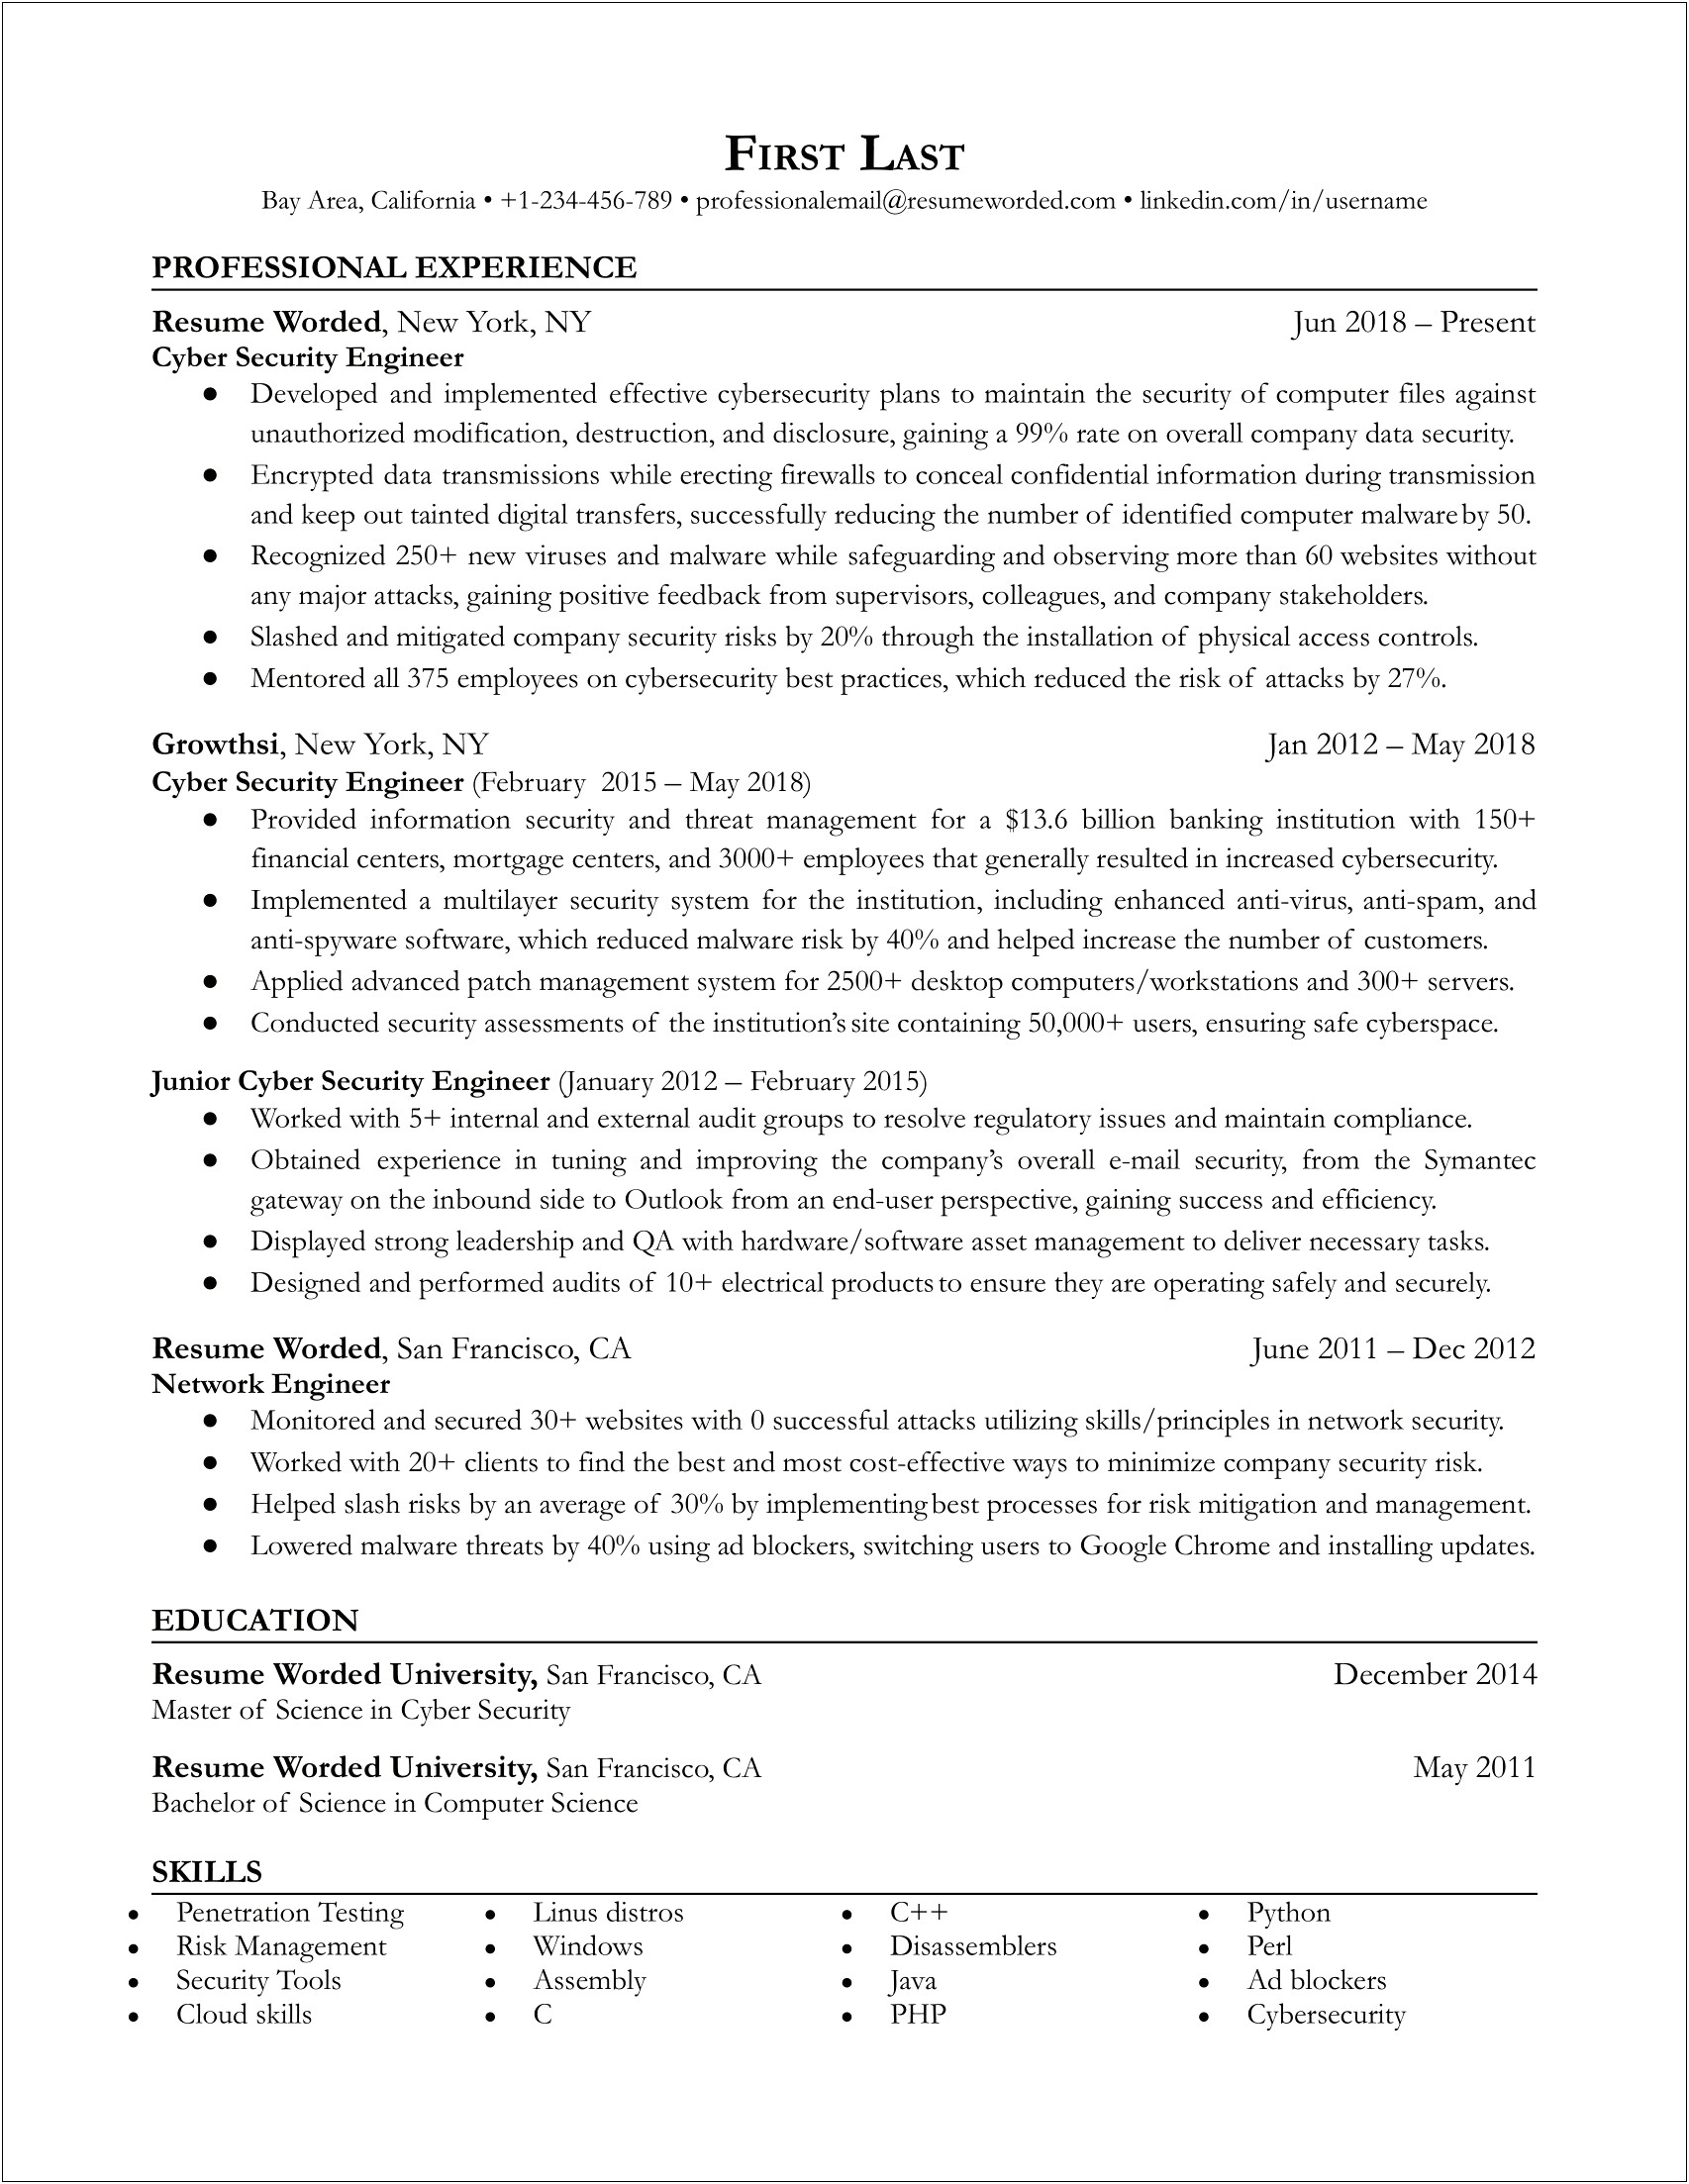 Network Security Engineer Resume Sample With Experience